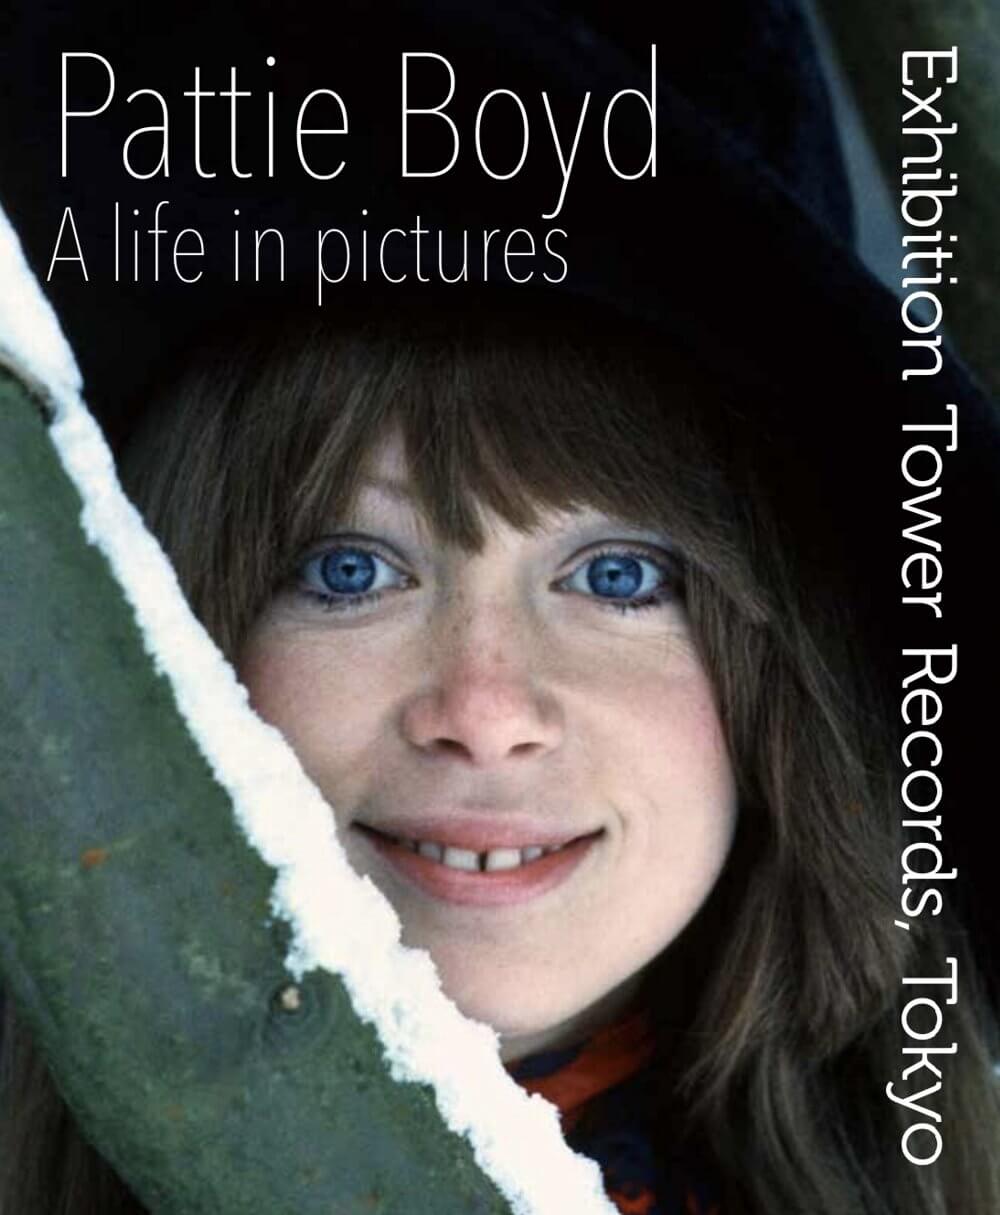 『Pattie Boyd: My Life in Pictures』 ～パティ・ボイド写真展～